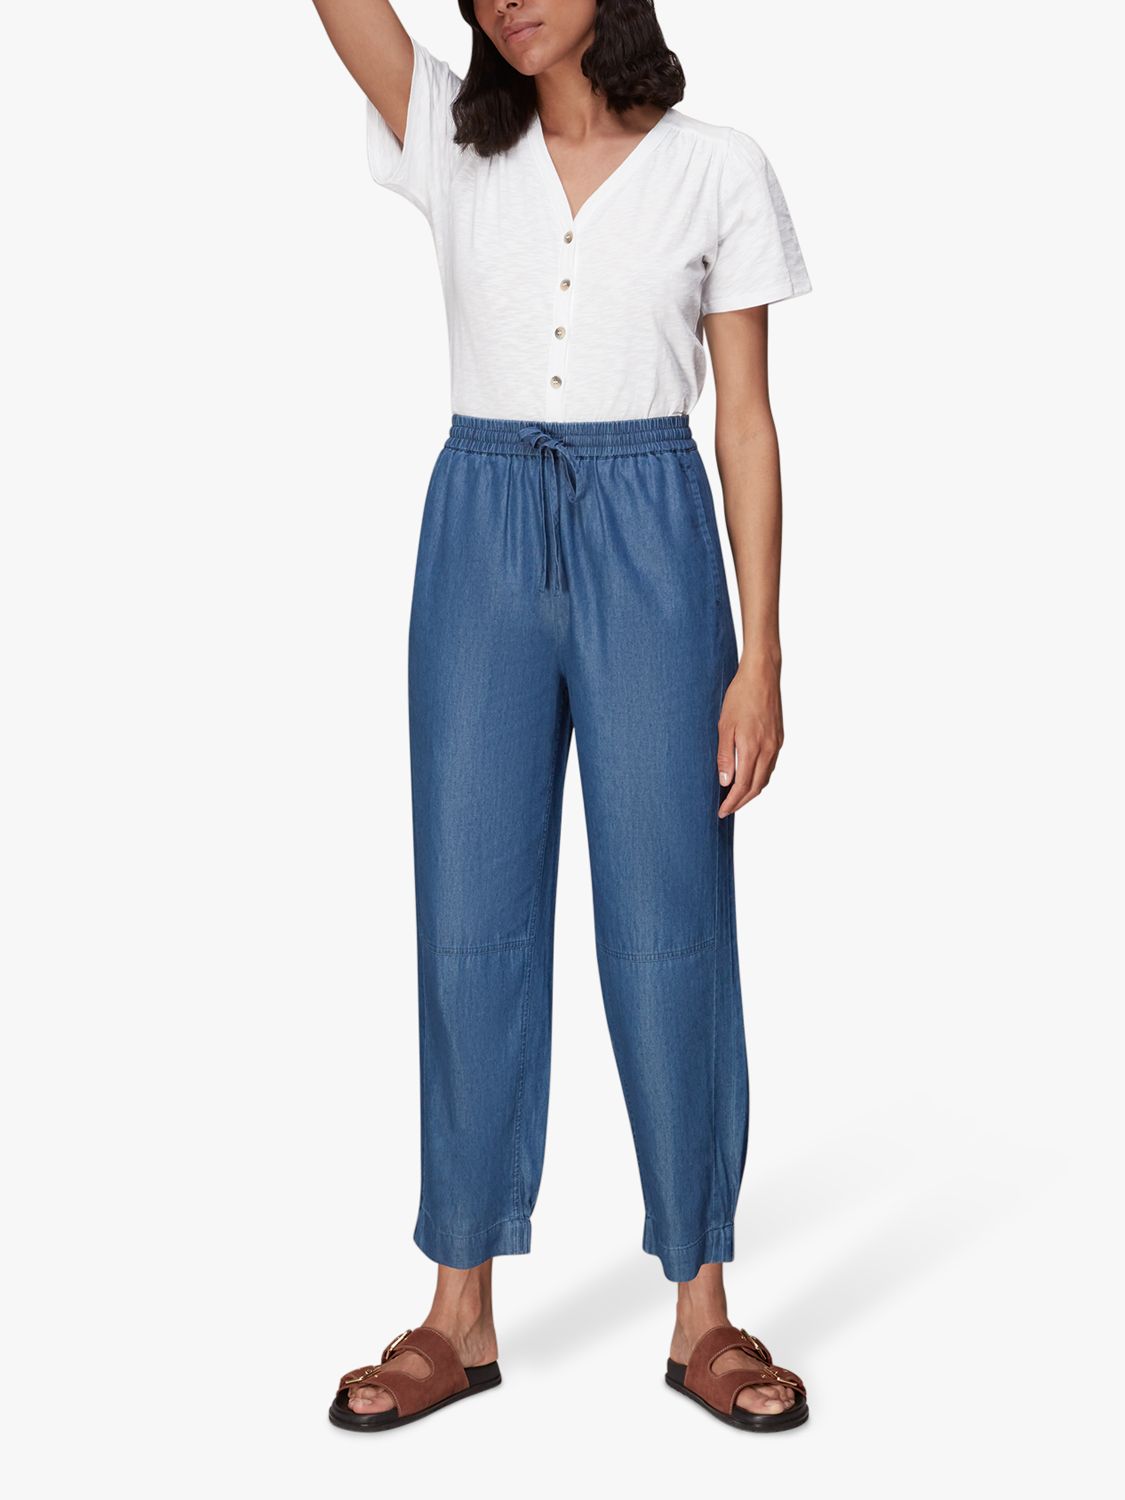 Whistles Maeve V-Neck Button Front Top, White at John Lewis & Partners